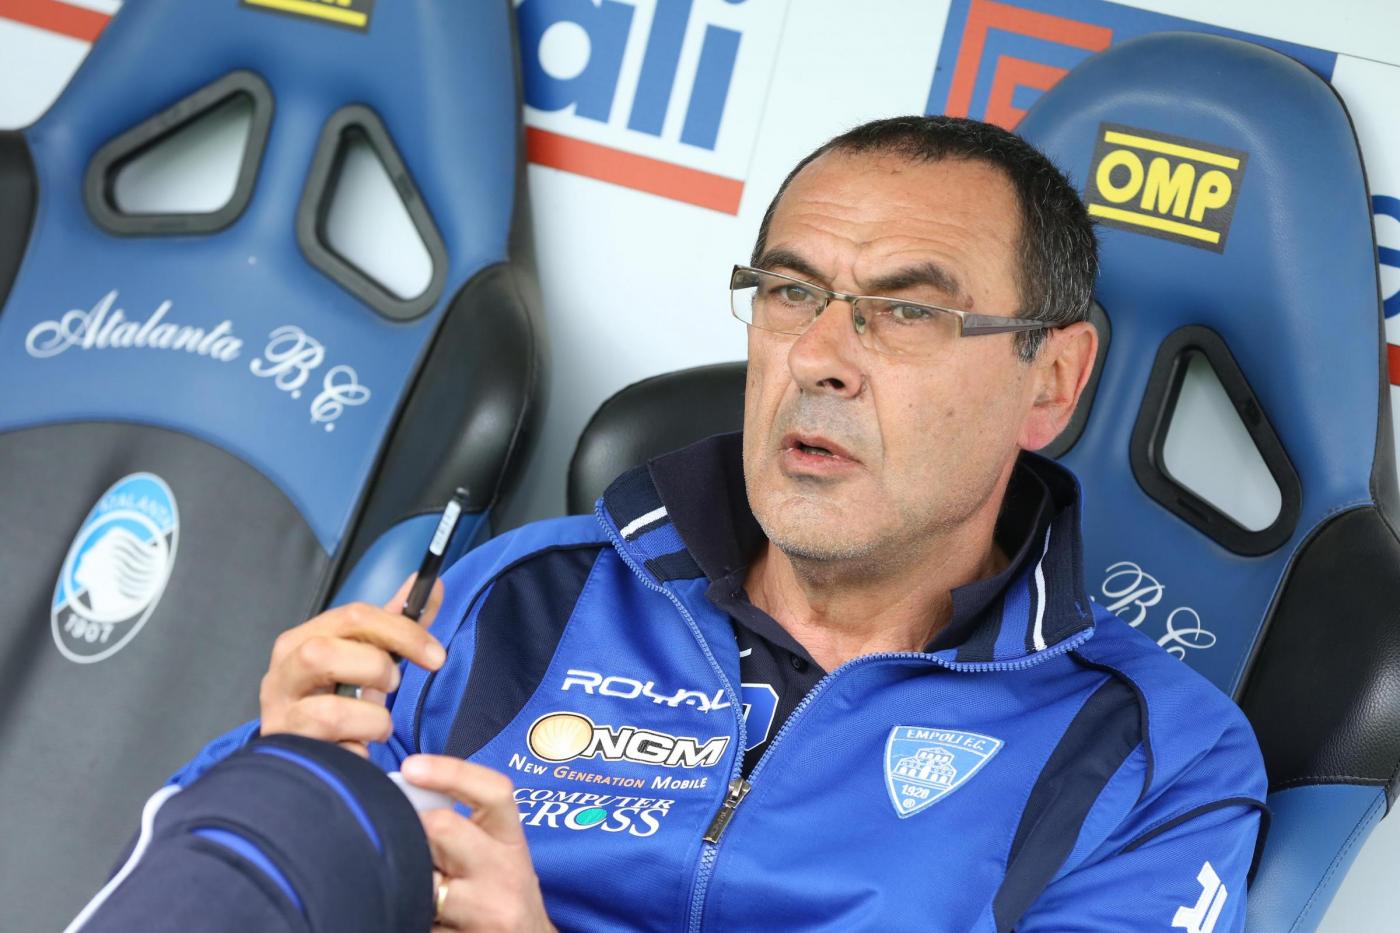 Milan seriously considered appointing Maurizio Sarri in 2015 after his successful and critically acclaimed run at Empoli.